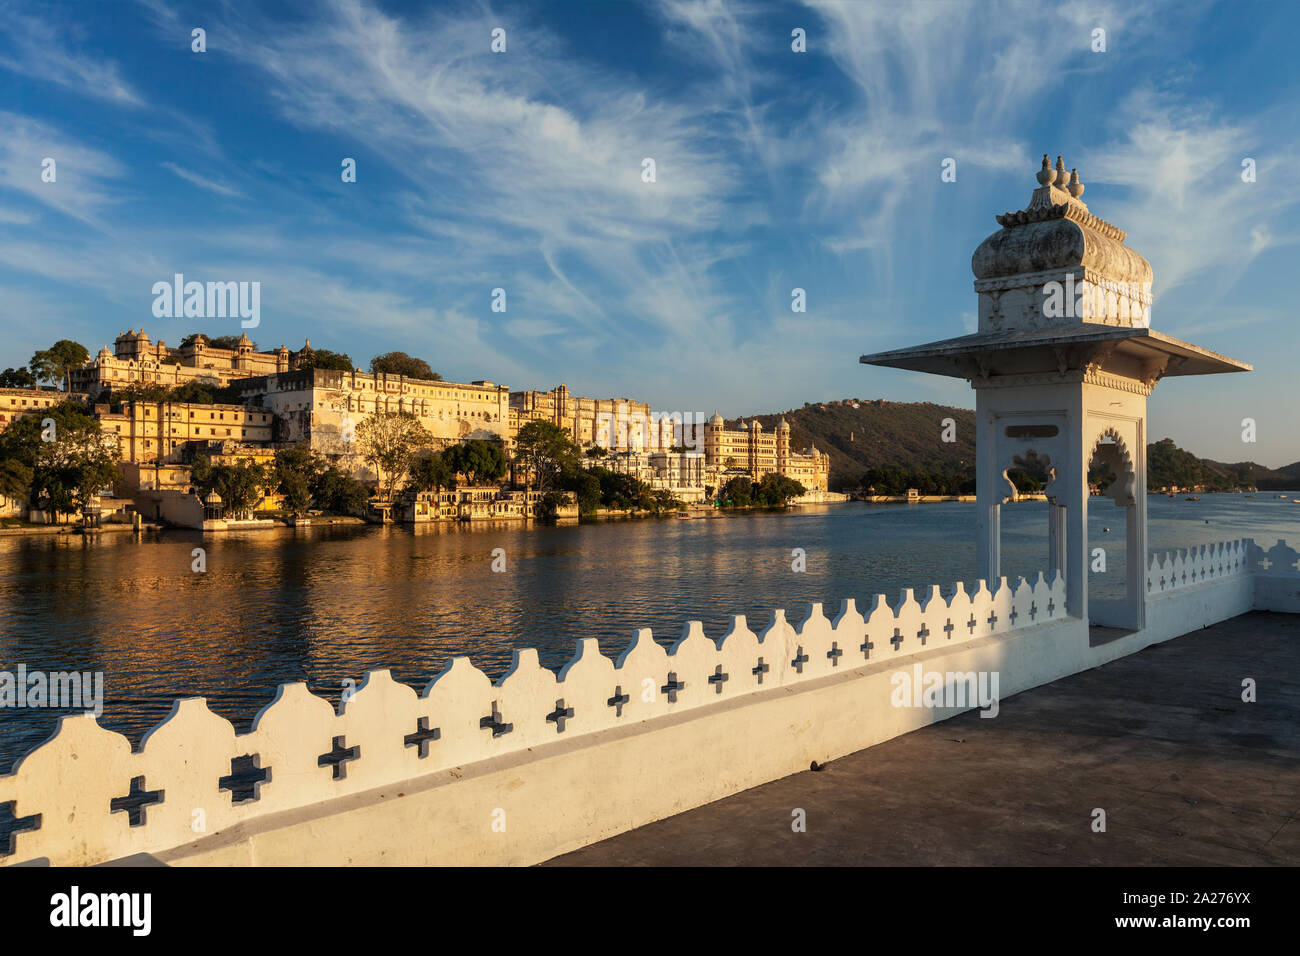 City Palace view from the lake. Udaipur, Rajasthan, India Stock Photo